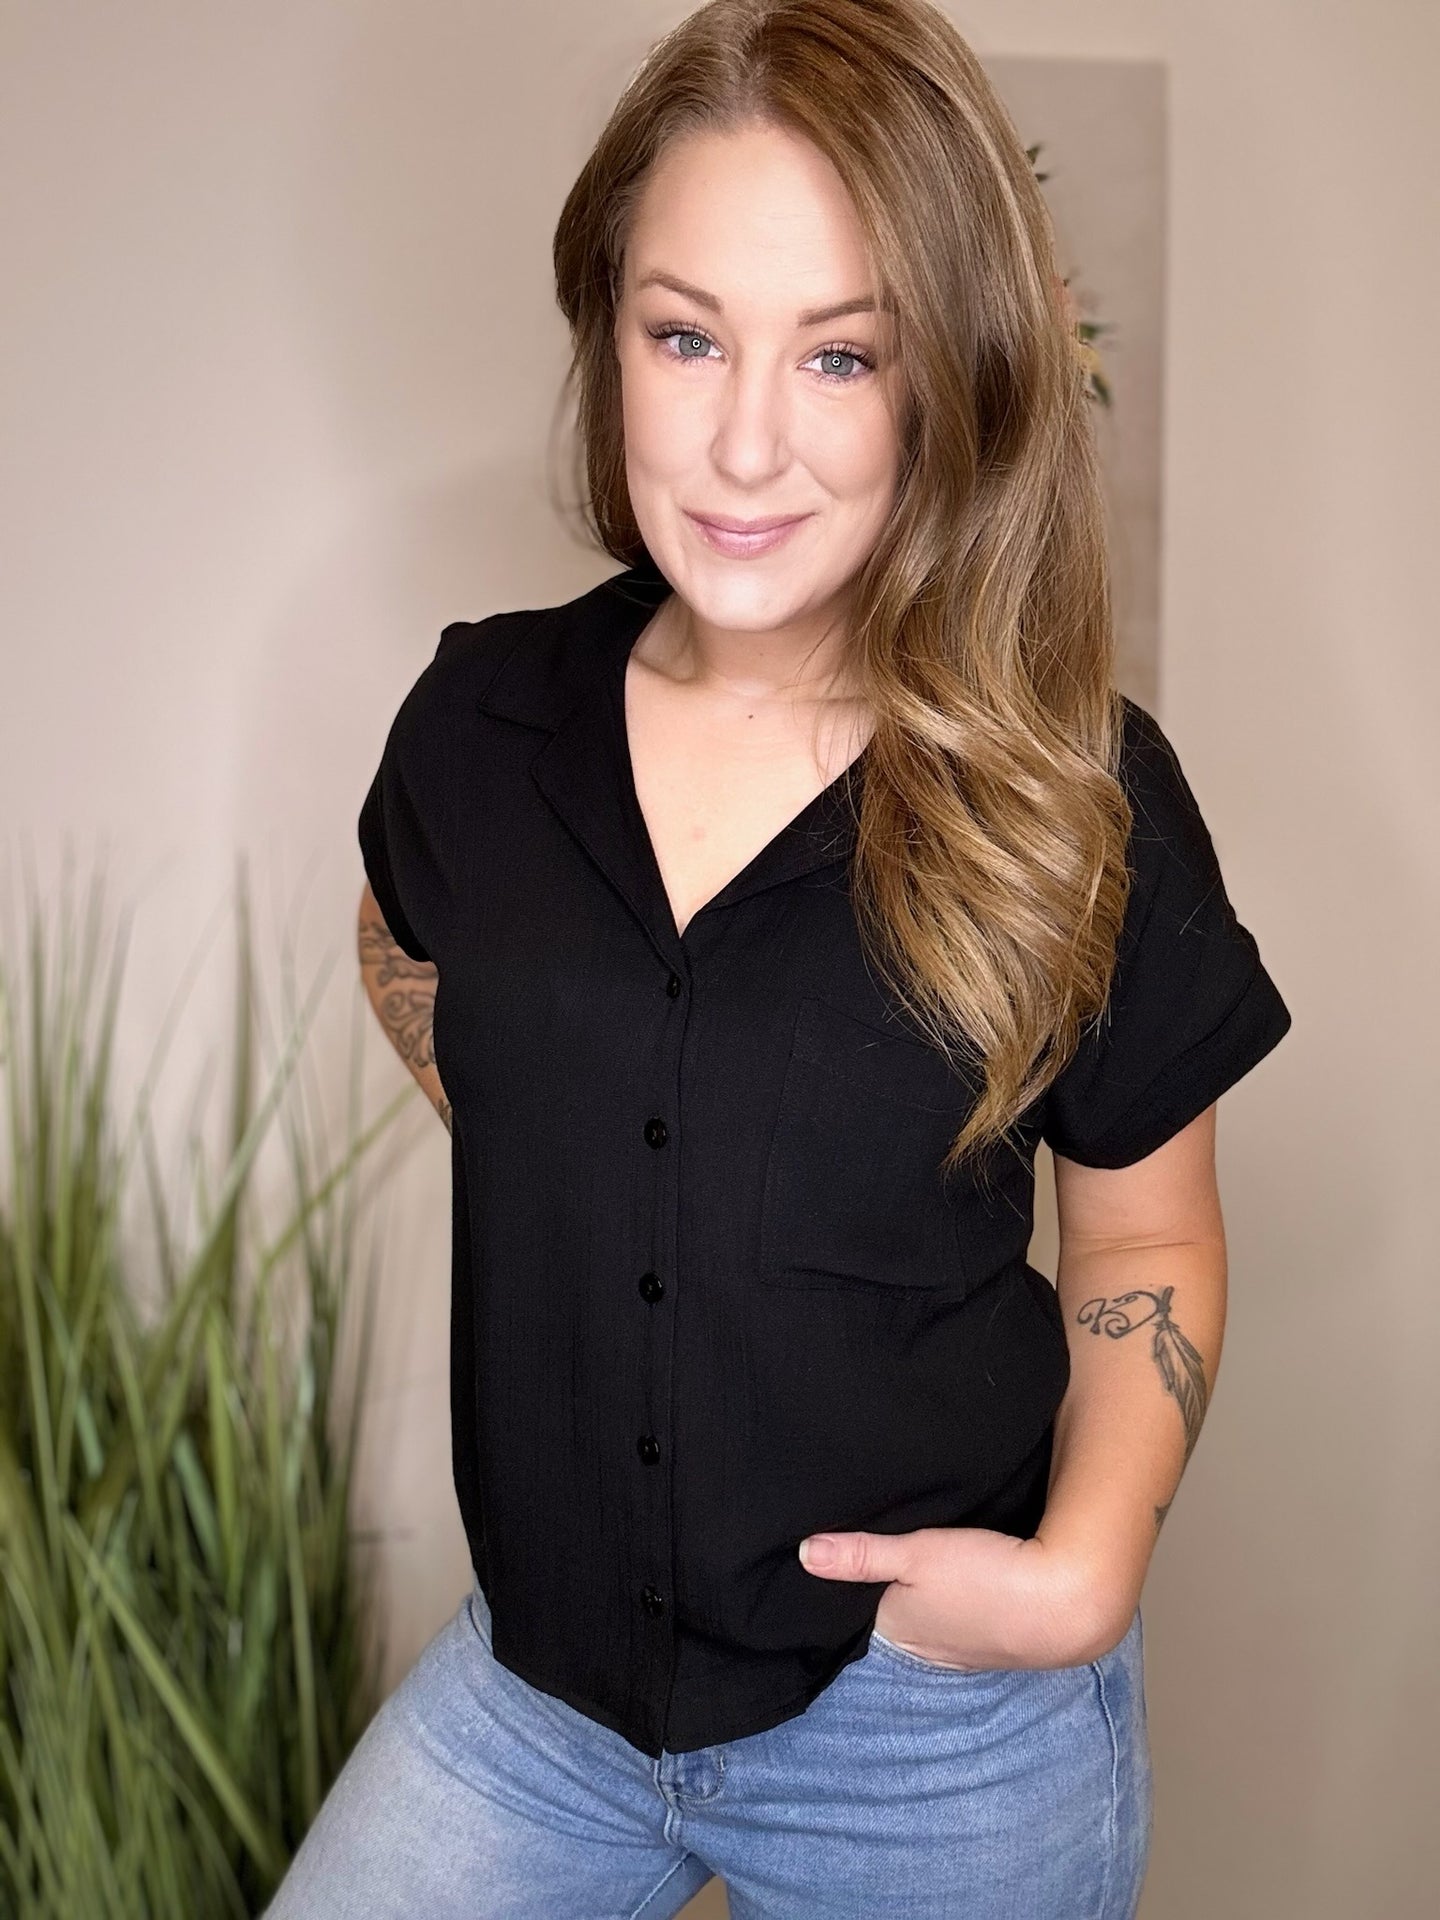 *Restock* Black Collared Button Up Top